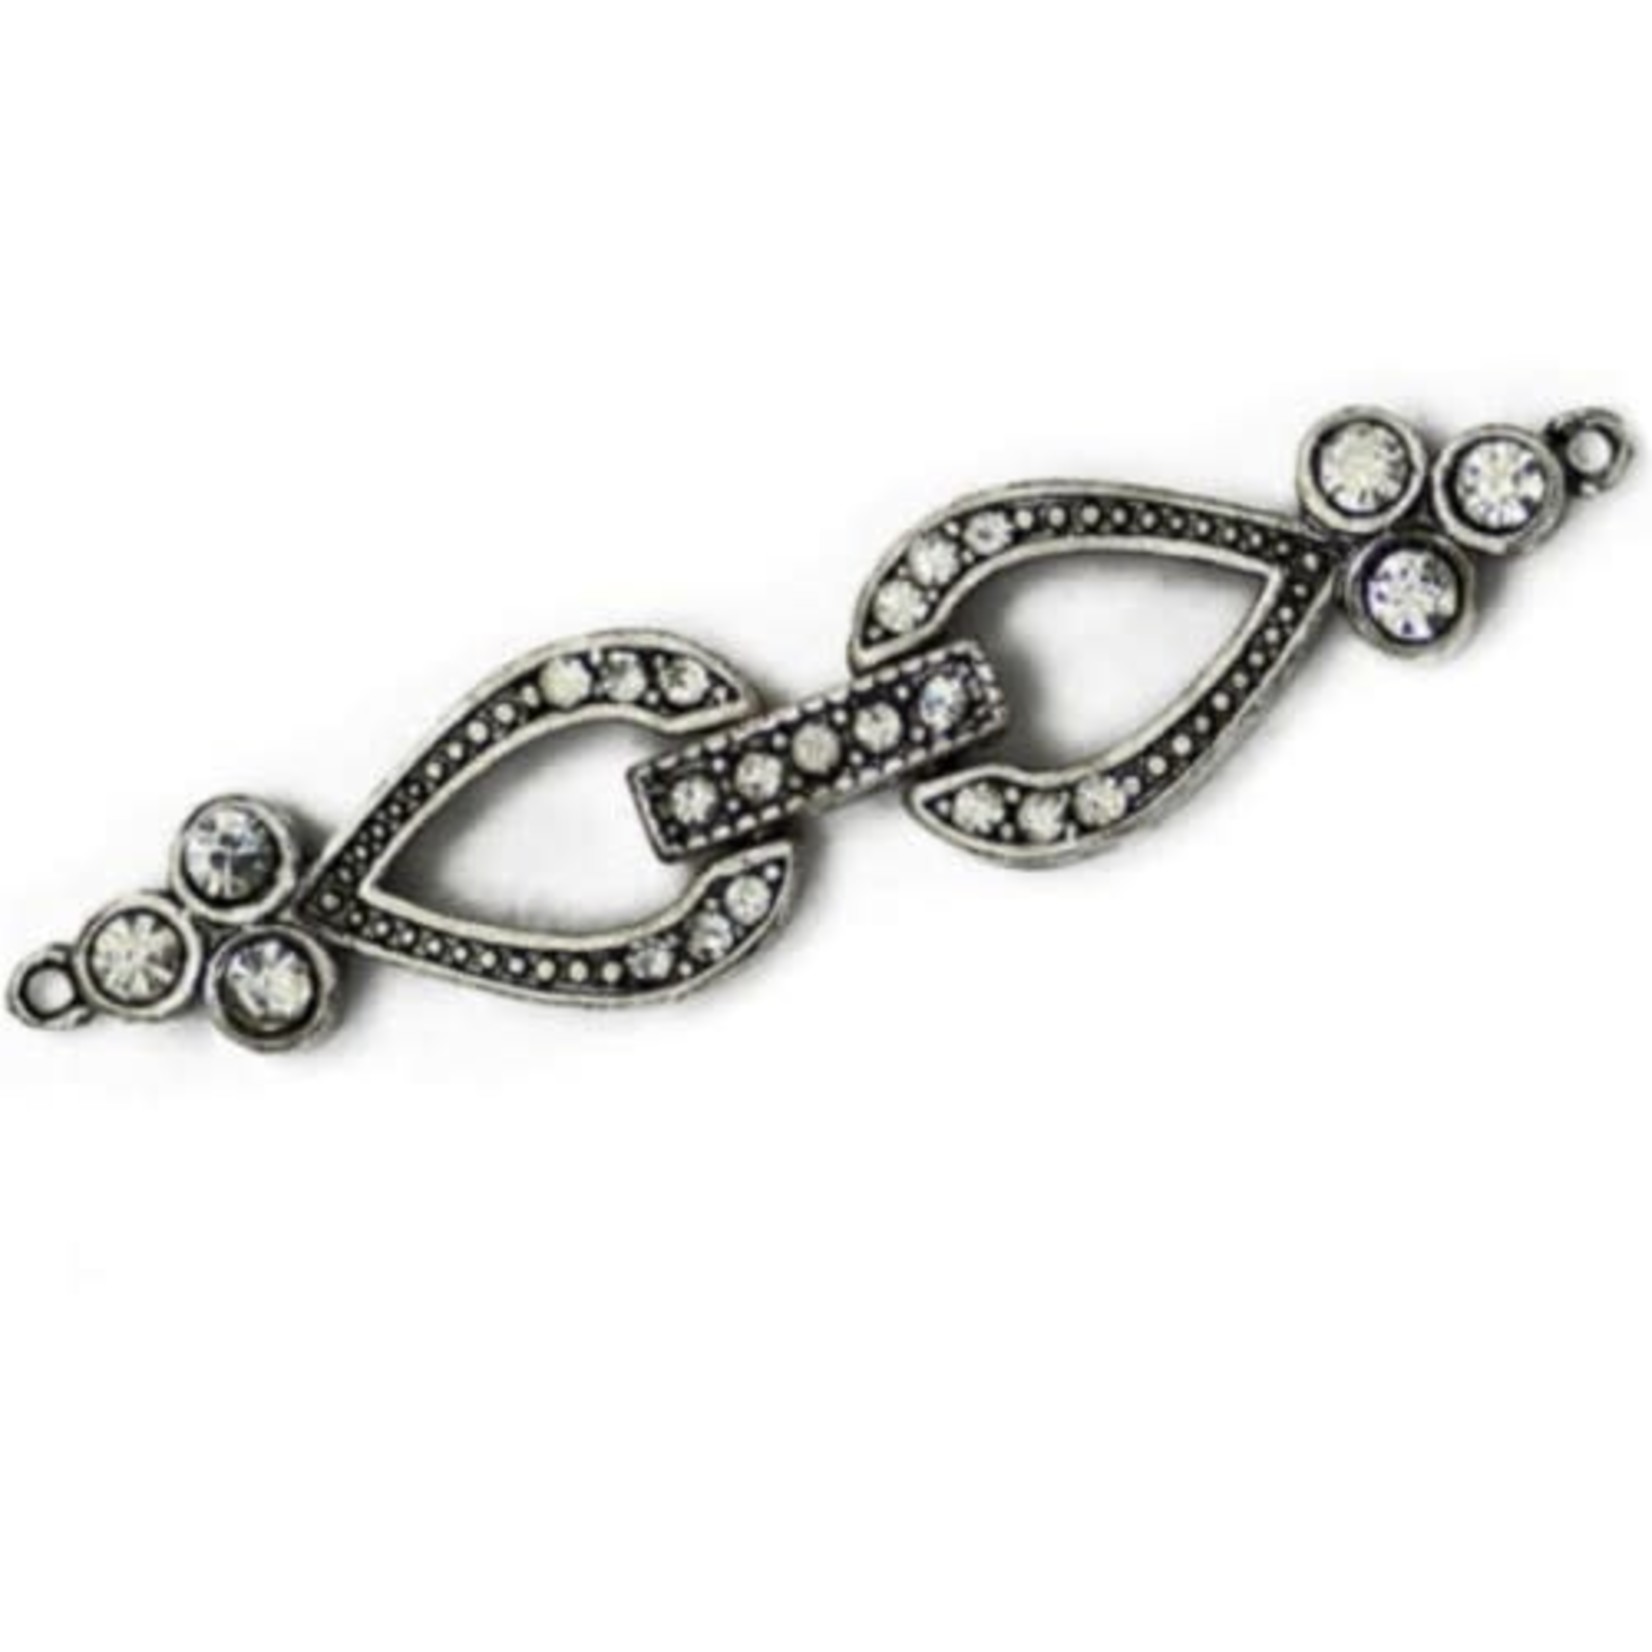 Pave Crystal Buckle Clasp Set - Nickel-Free Antique Silver Plated